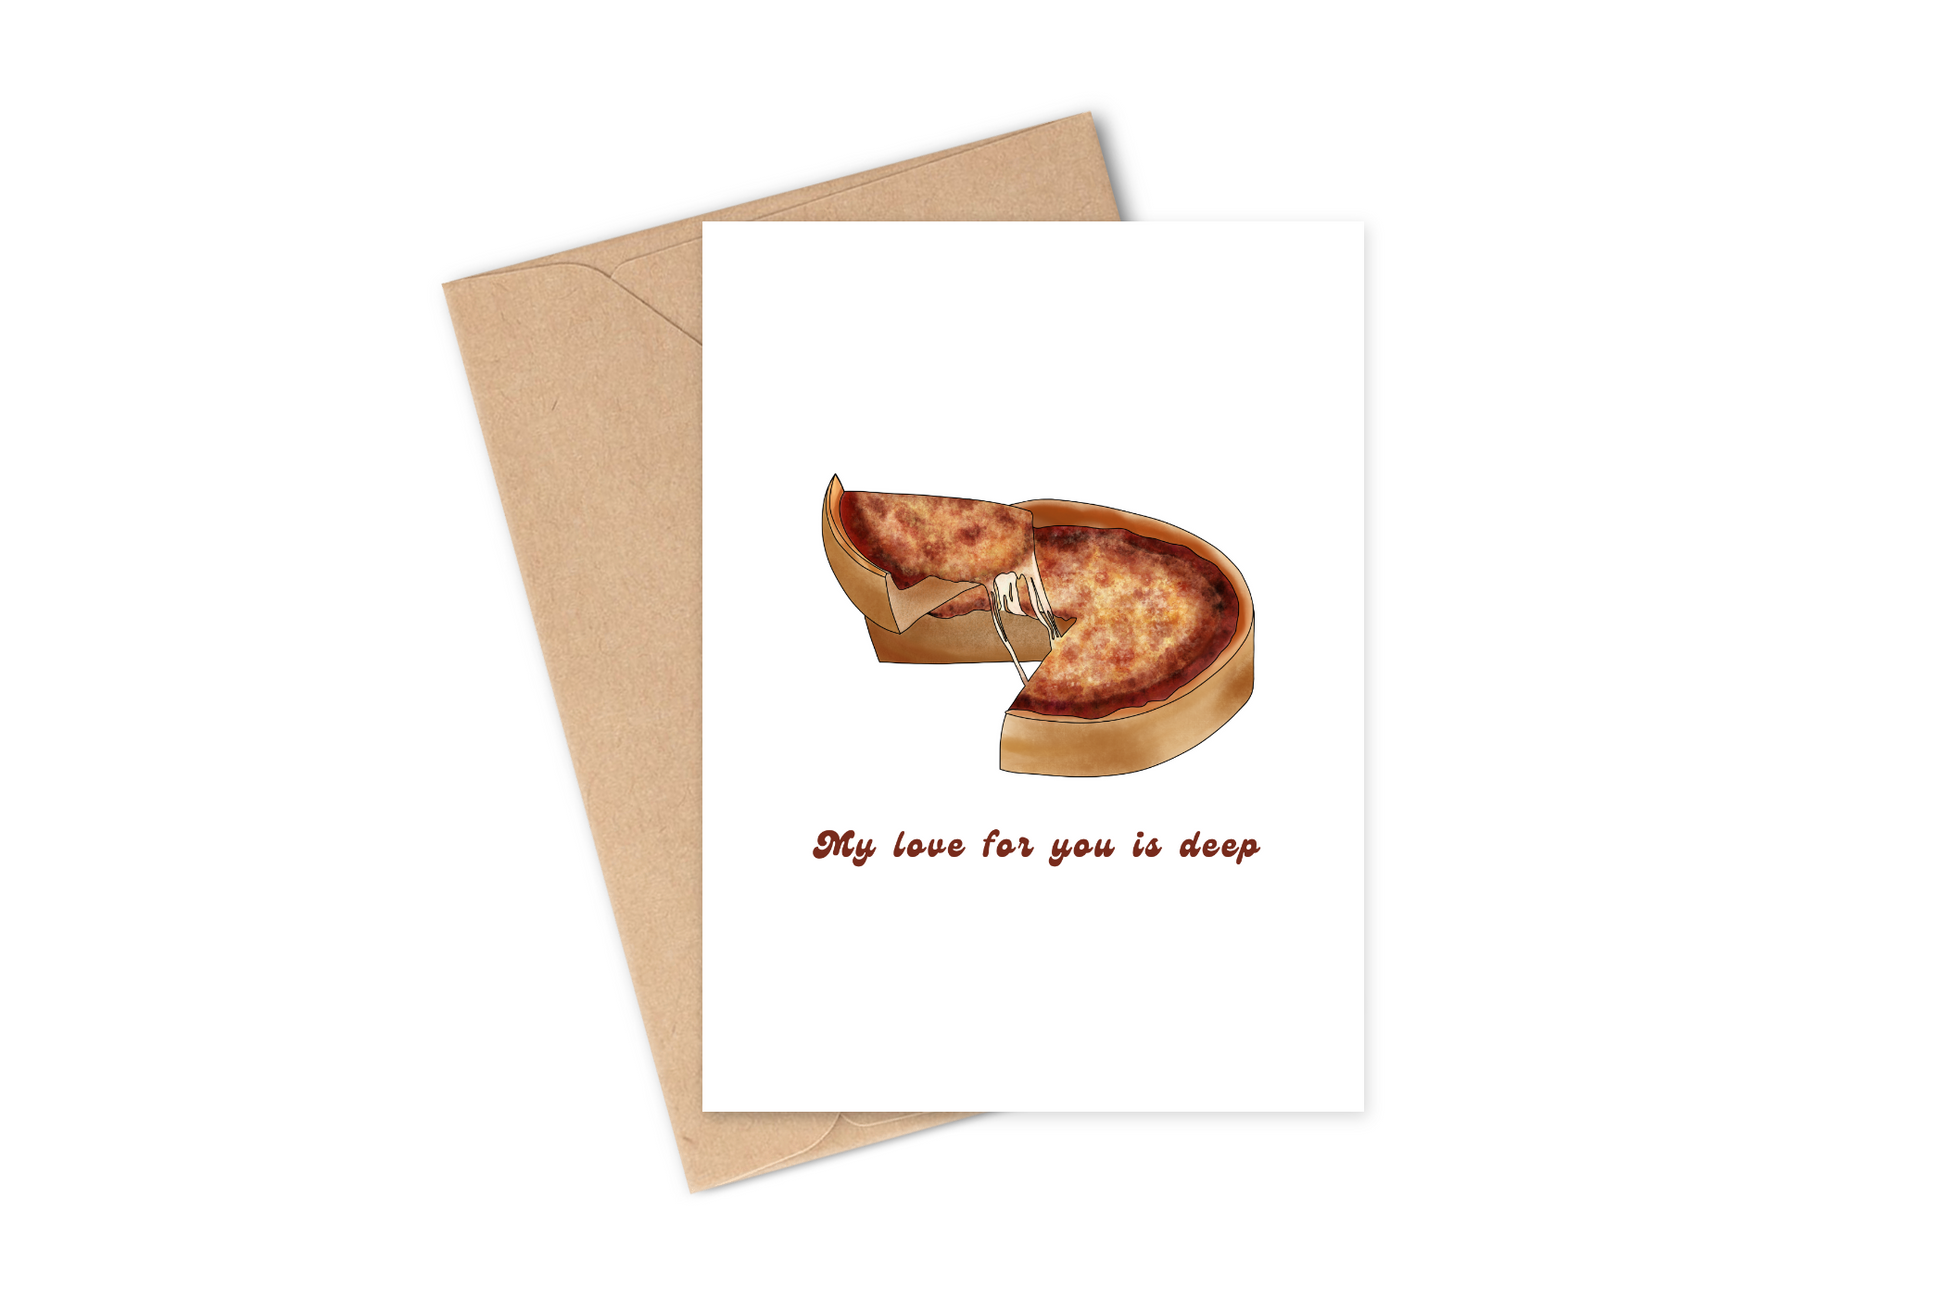 The perfect greeting card for your Chicago deep dish-loving loved one! It says "Yay love for you is deep" with a picture of Chicago-style deep dish pizza with ooey, gooey cheese. This card is best paired with a piping hot pizza because this drawing looks so good they're going to want to eat a slice! 